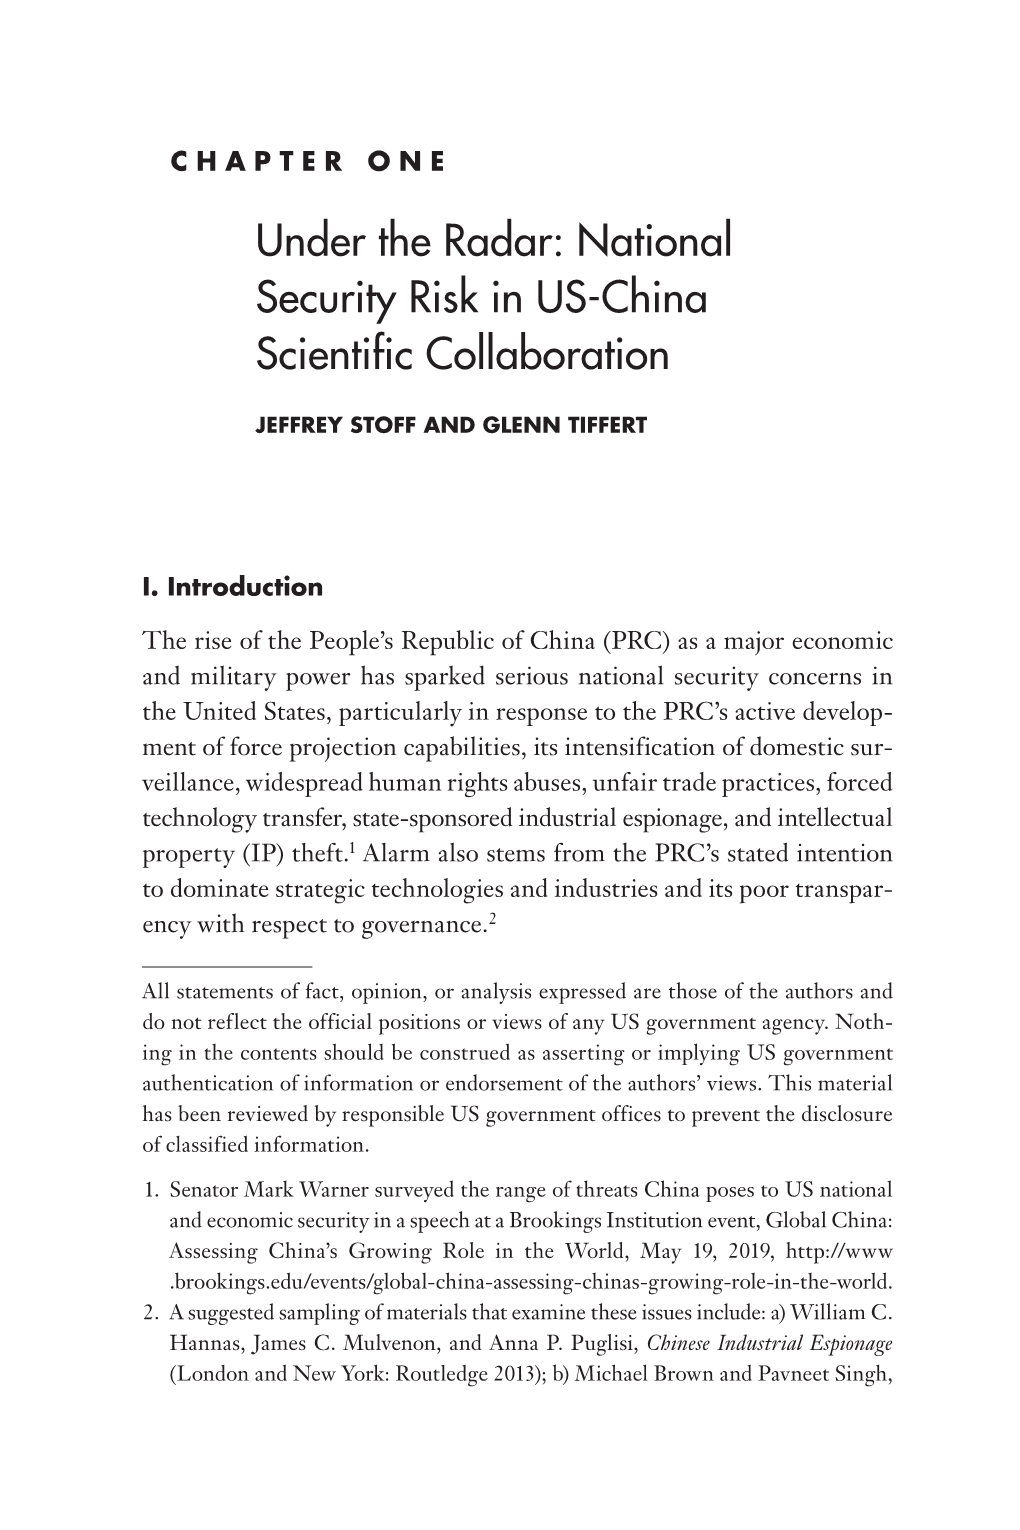 National Security Risk in US- China Scientific Collaboration